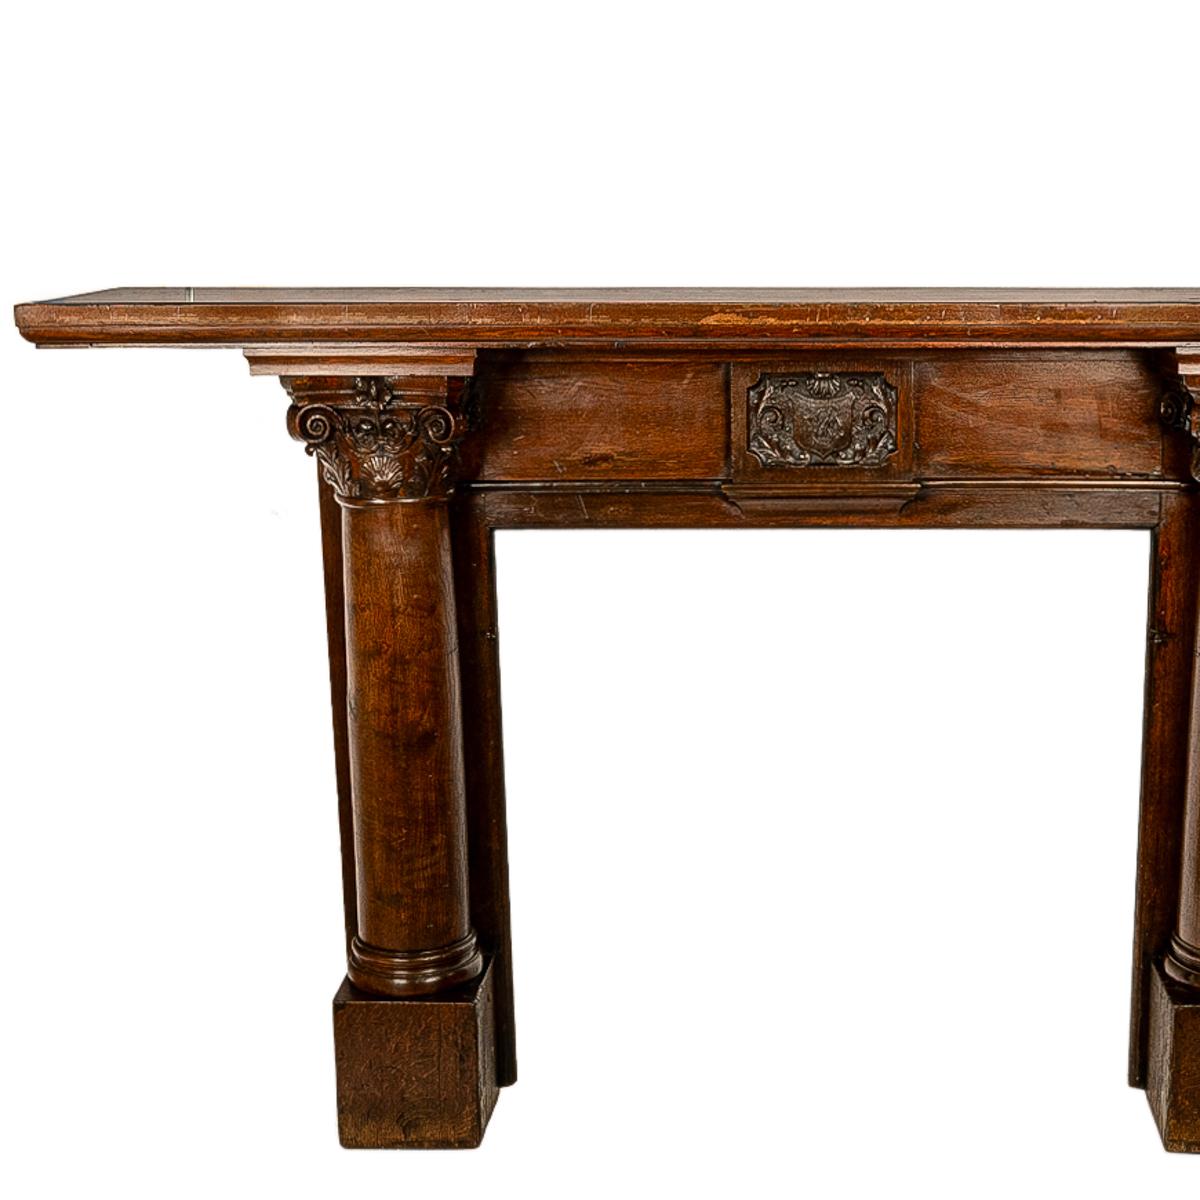 Late 19th Century Antique 19th Century Carved Oak Column Fireplace Mantel Surround San Francisco For Sale